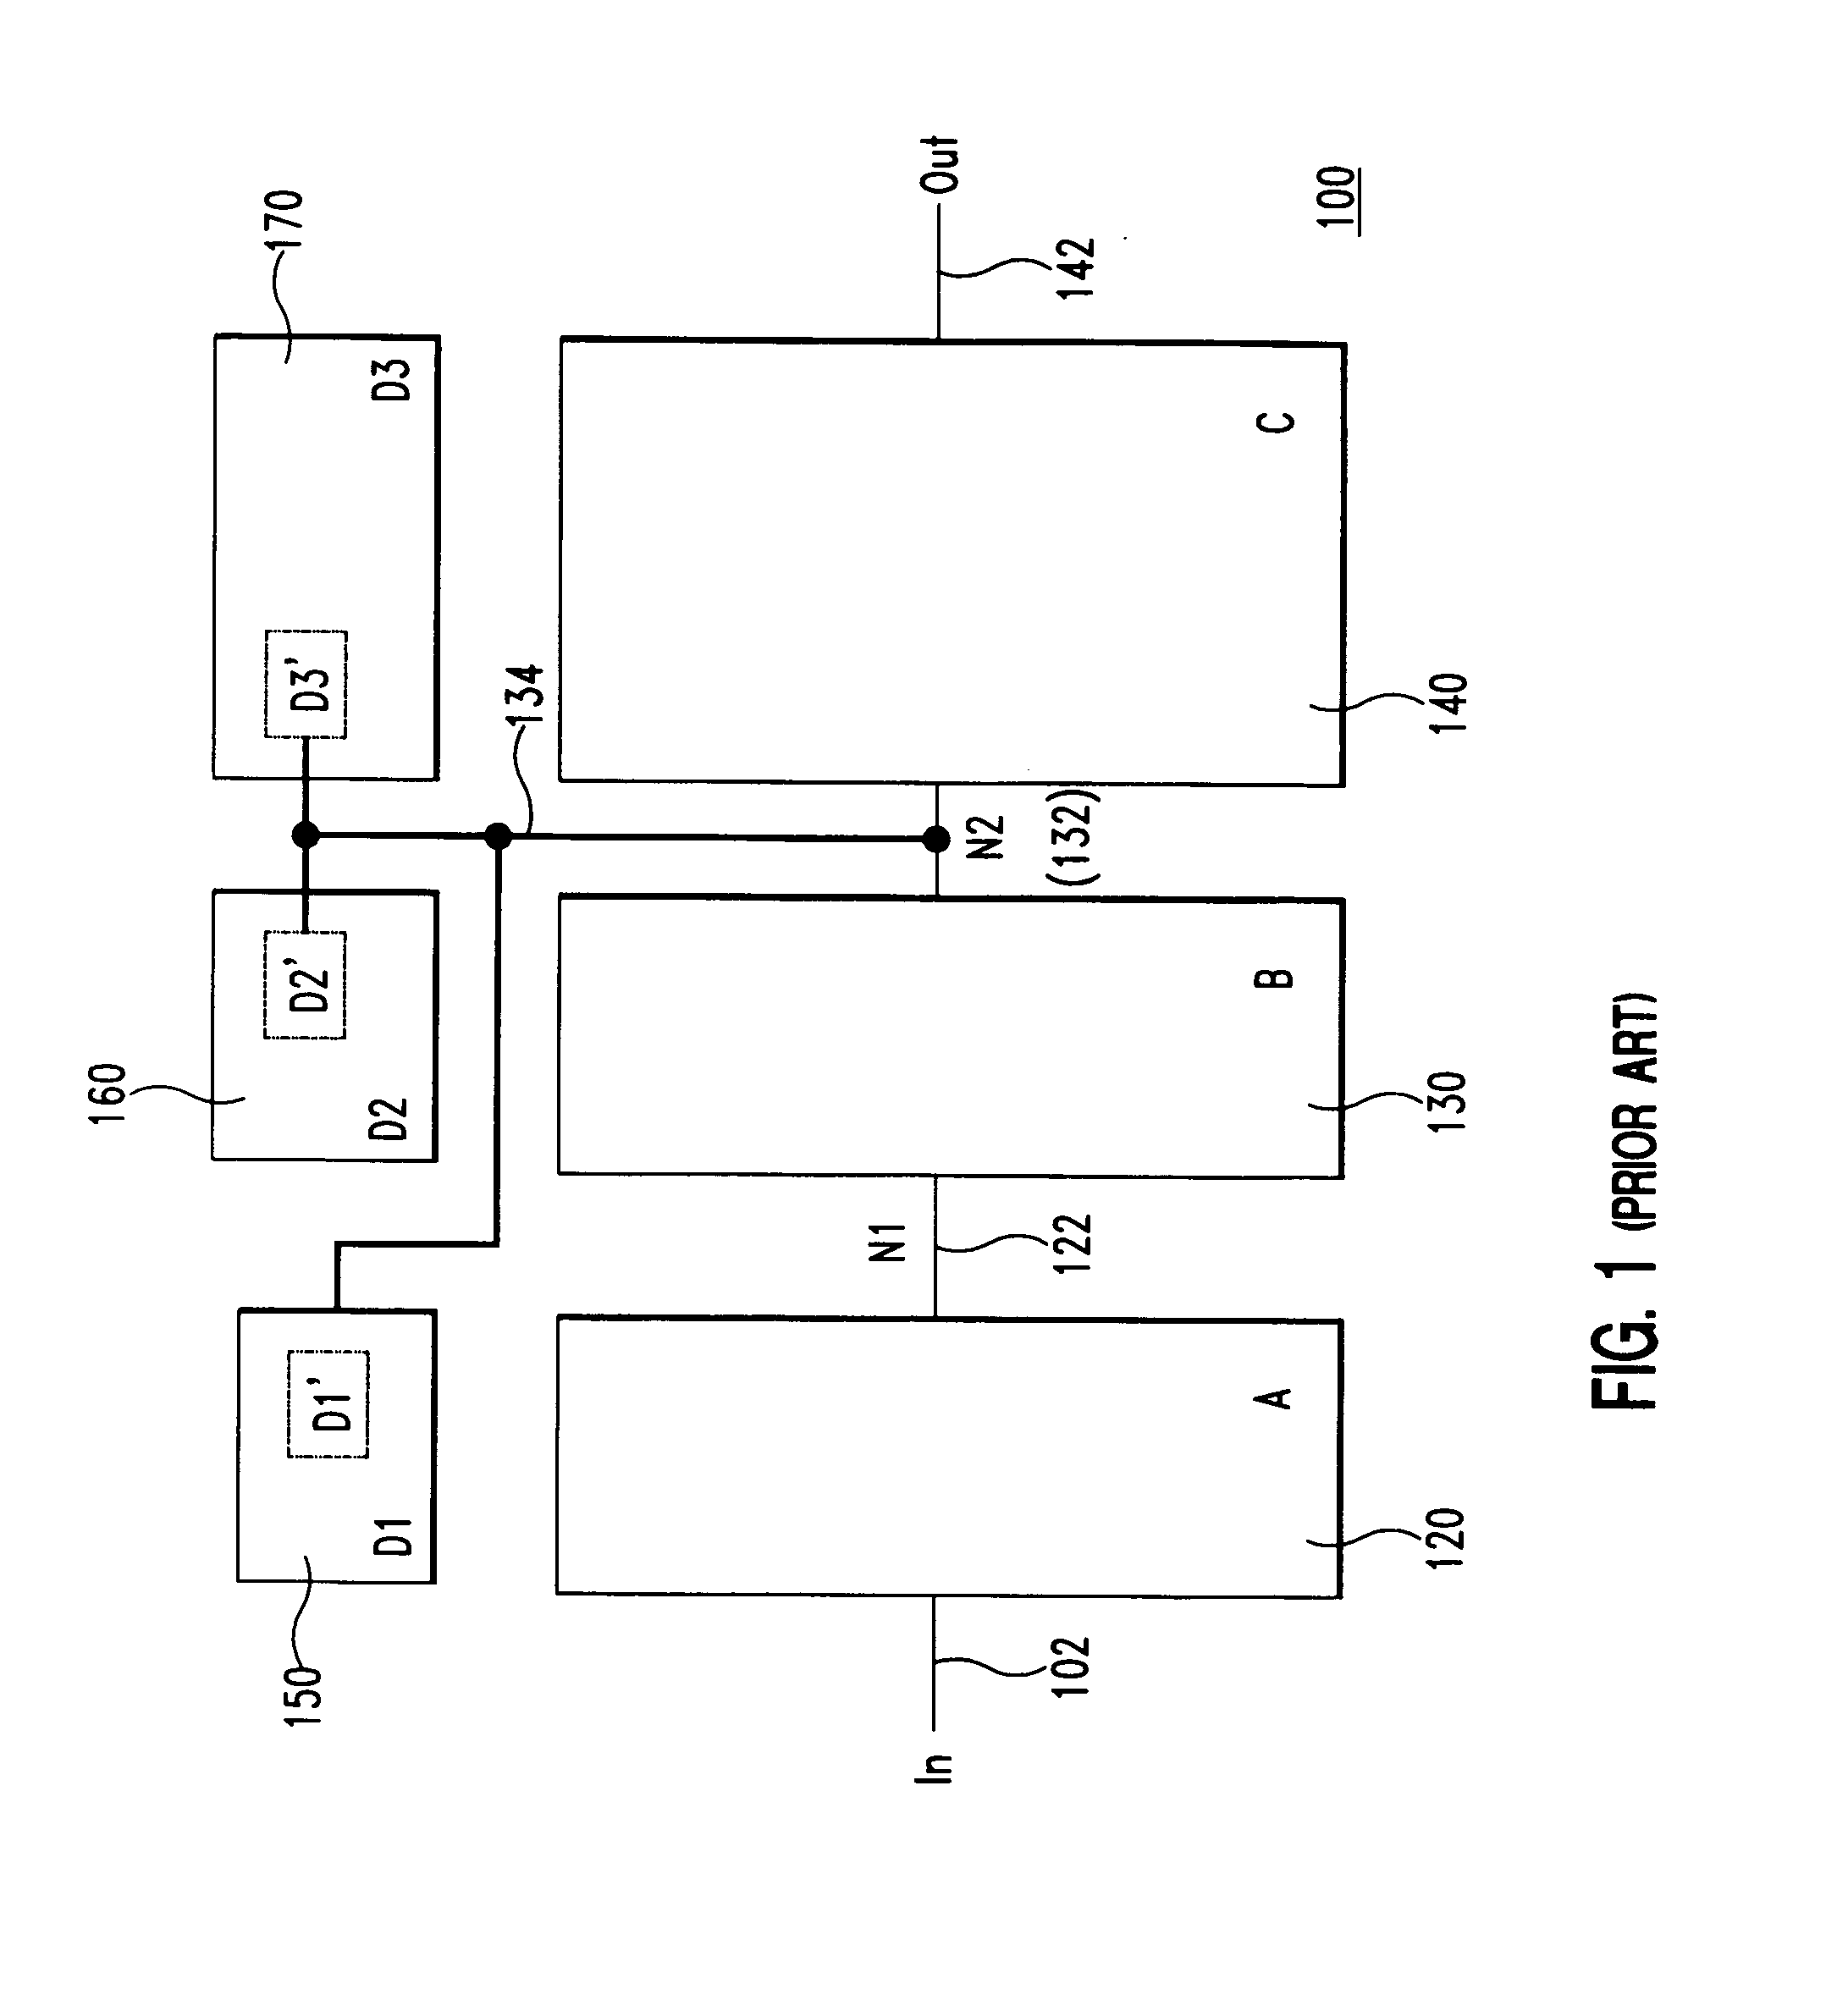 Structure for apparatus for reduced loading of signal transmission elements